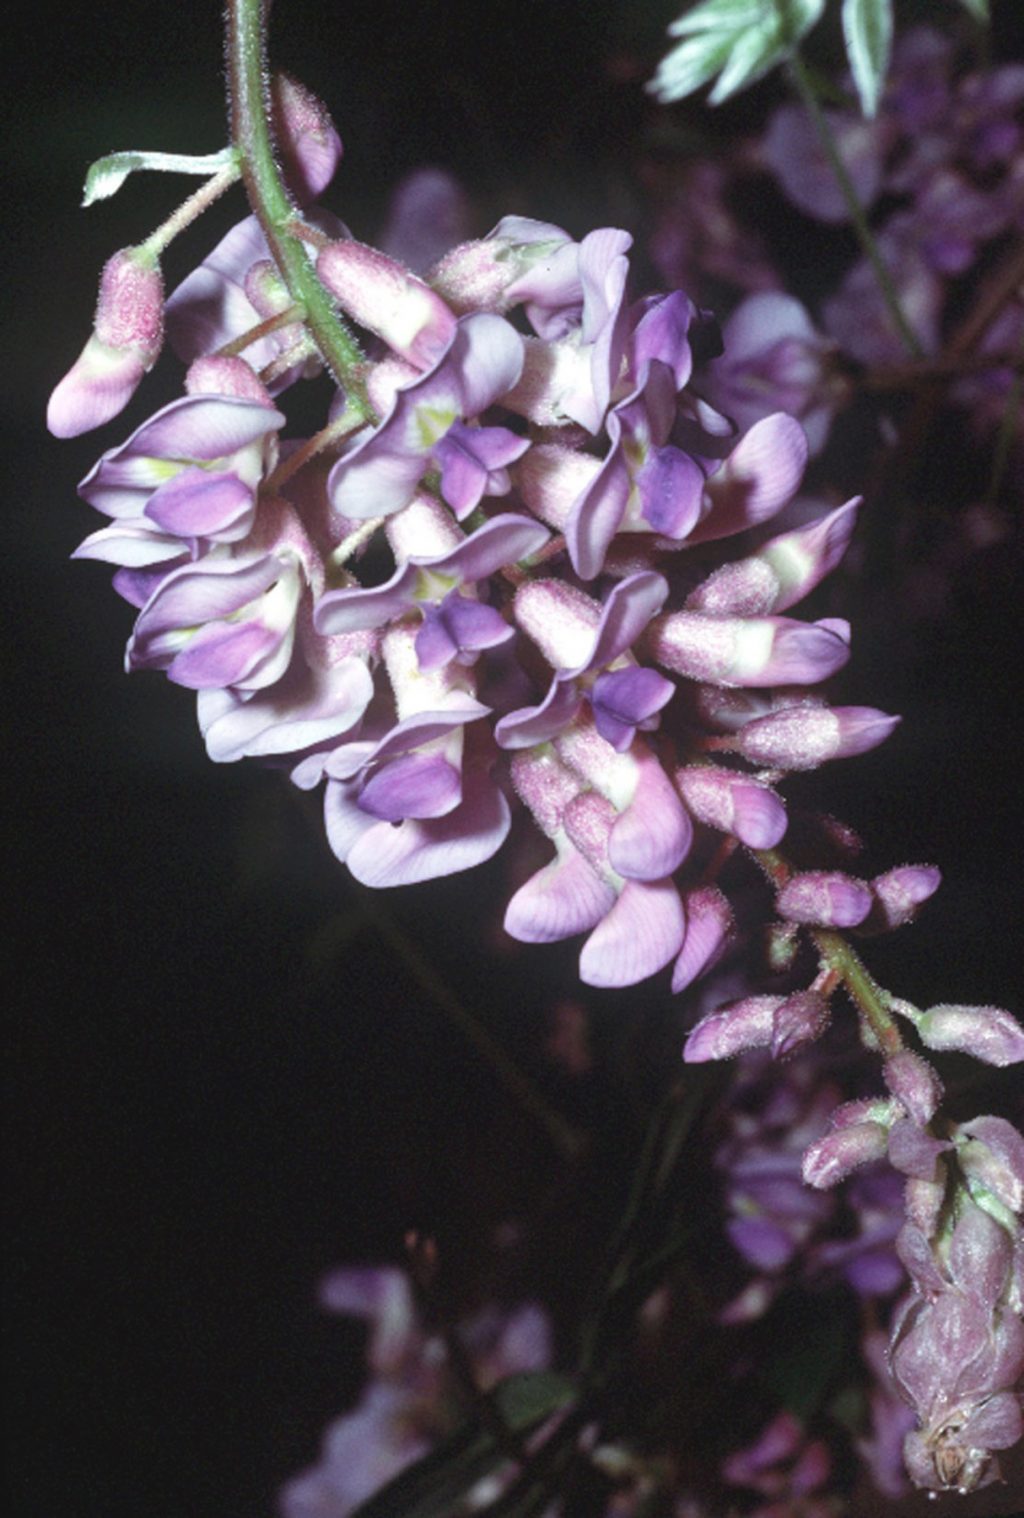 Purple flowers hanging from a stem